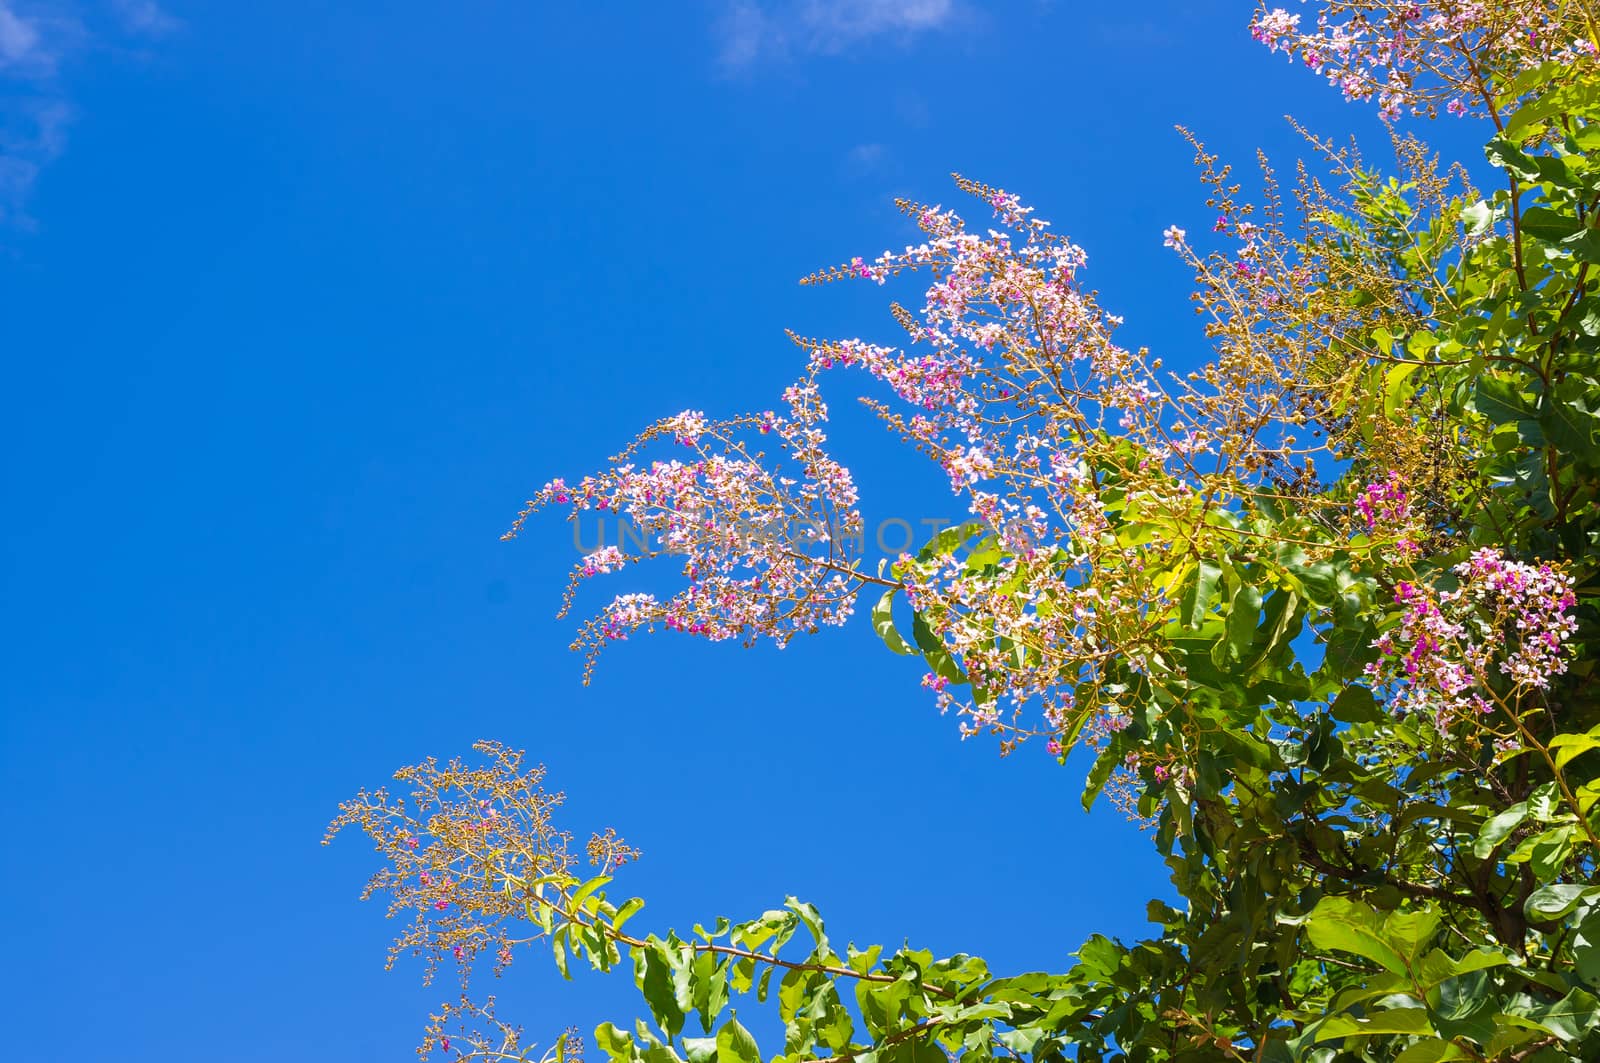 Lagerstroemia speciosa, Pride of India, Queen's flower on blue sky.